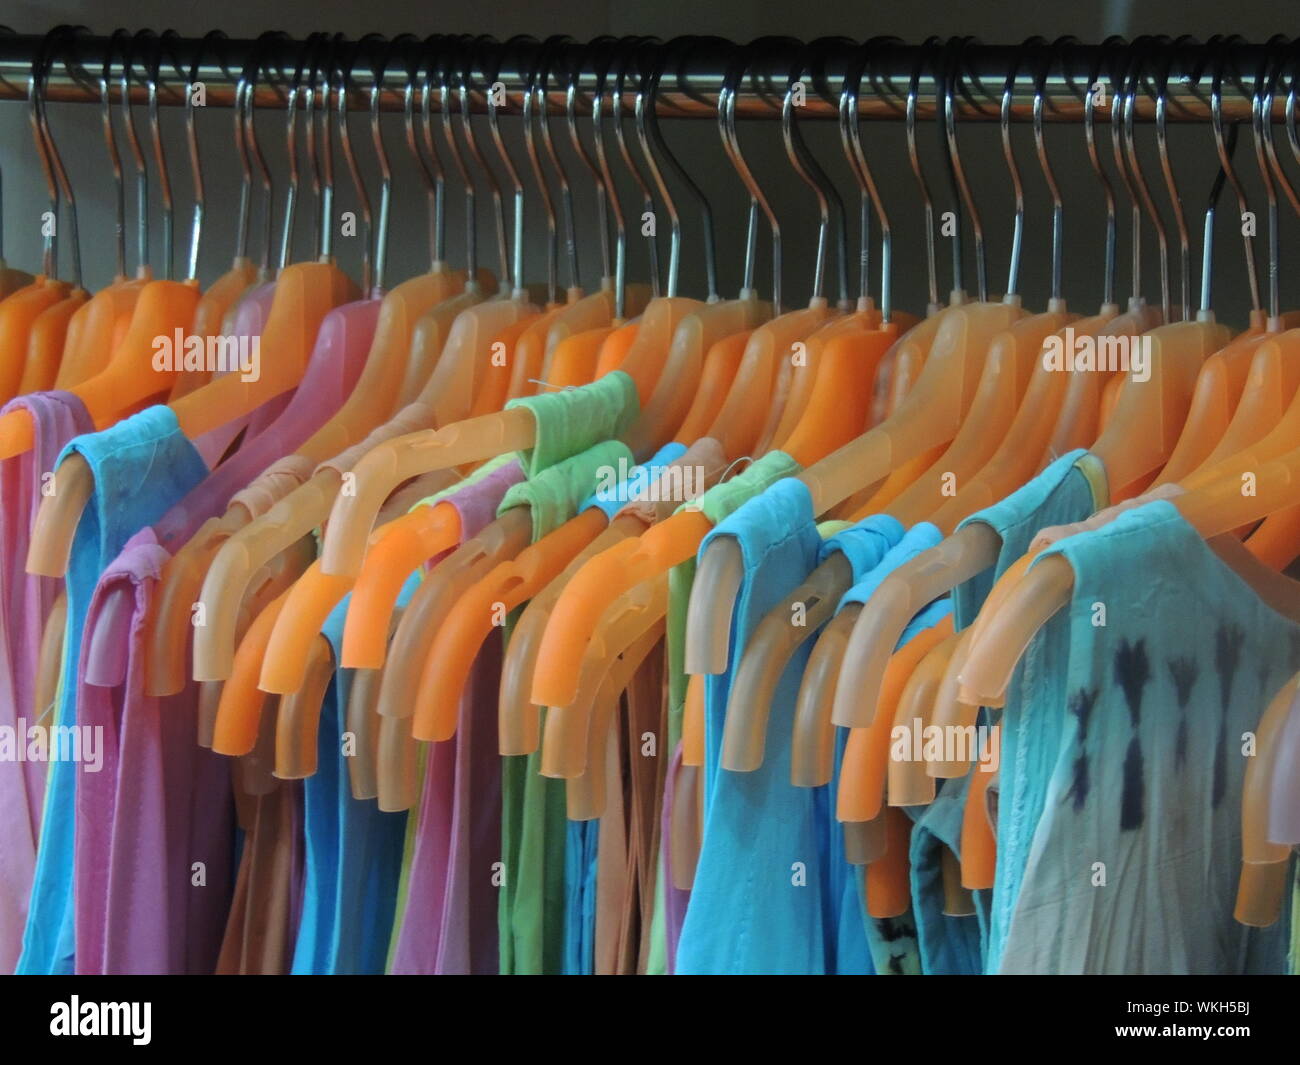 Shirts Rack High Resolution Stock Photography and Images - Alamy